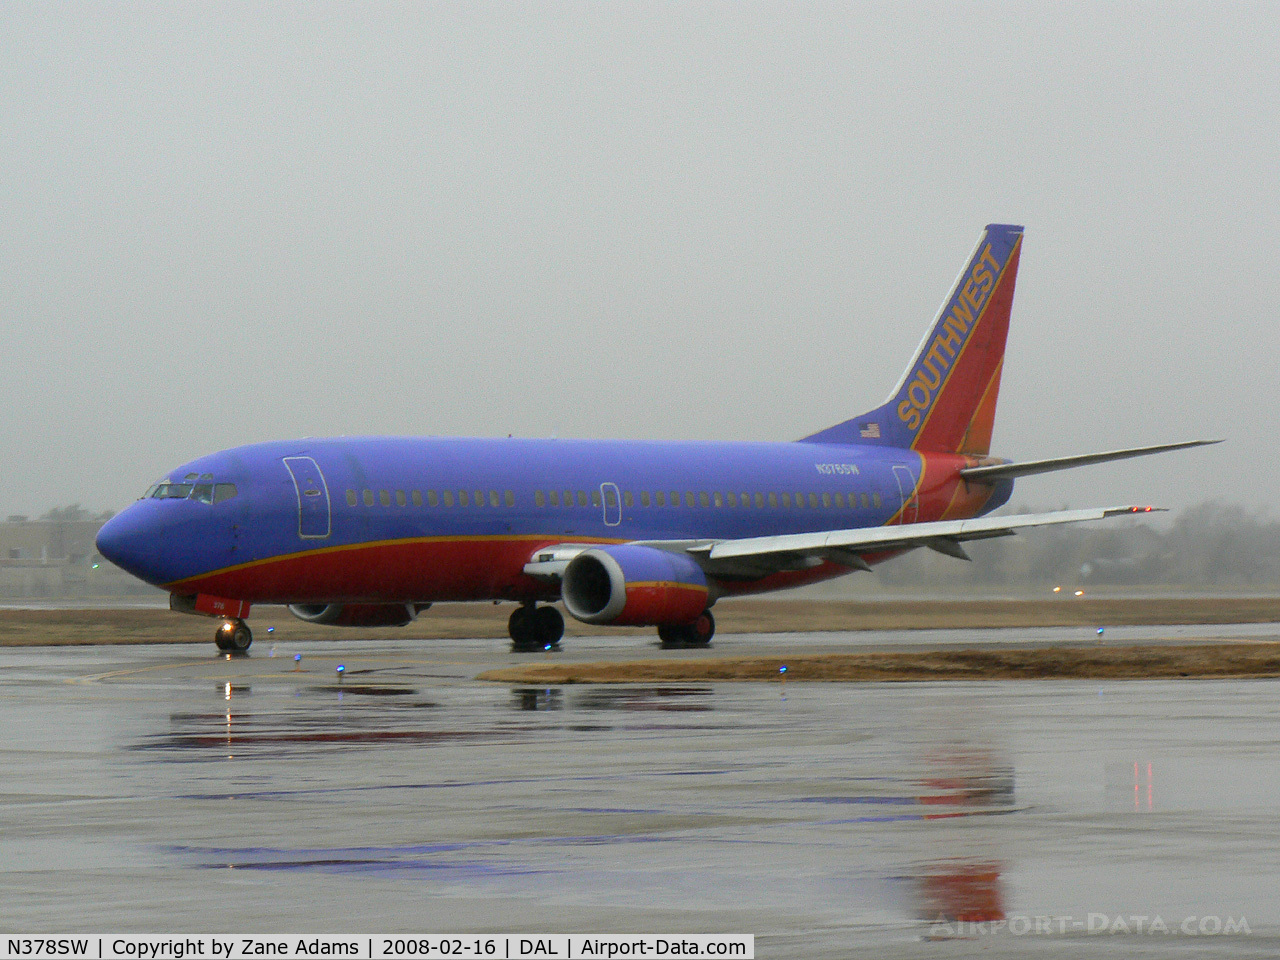 N378SW, 1994 Boeing 737-3H4 C/N 26585, Southwest Airlines - In the rain at Love Field, Dallas, TX